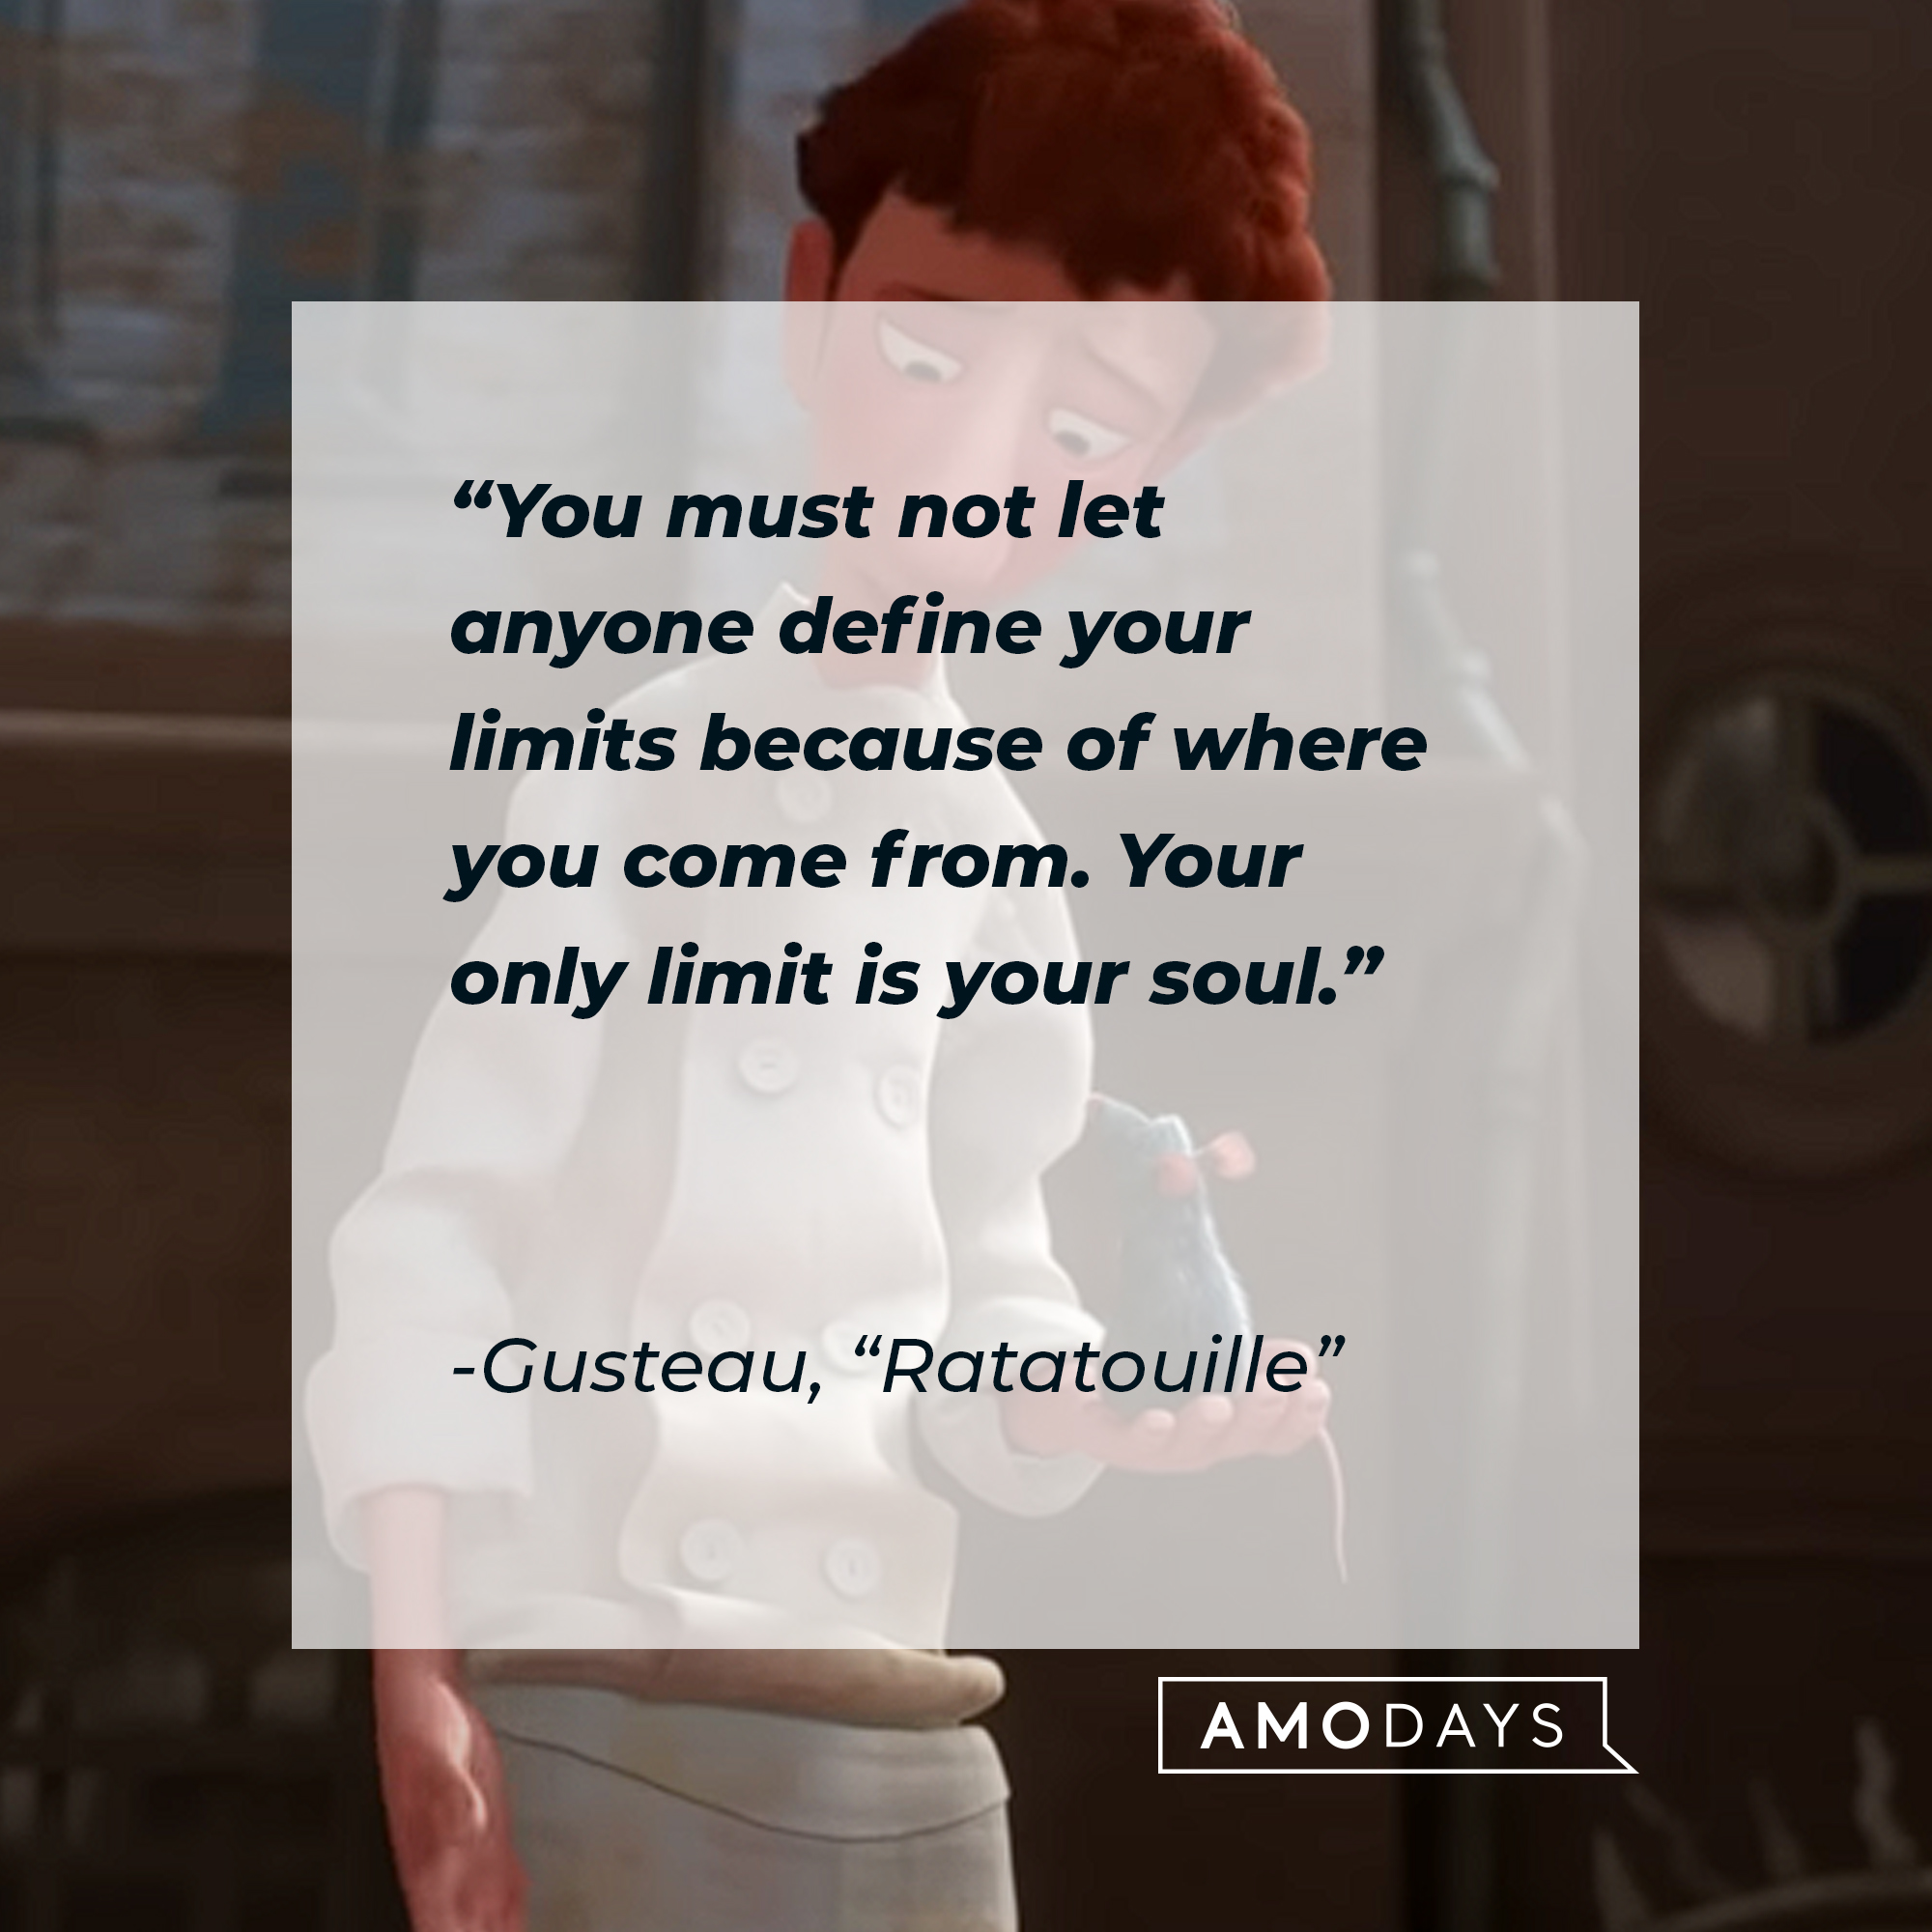 Gusteau's "Ratatouille" quote: "You must not let anyone define your limits because of where you come from. Your only limit is your soul." | Source: Youtube.com/DisneyMusicVEVO